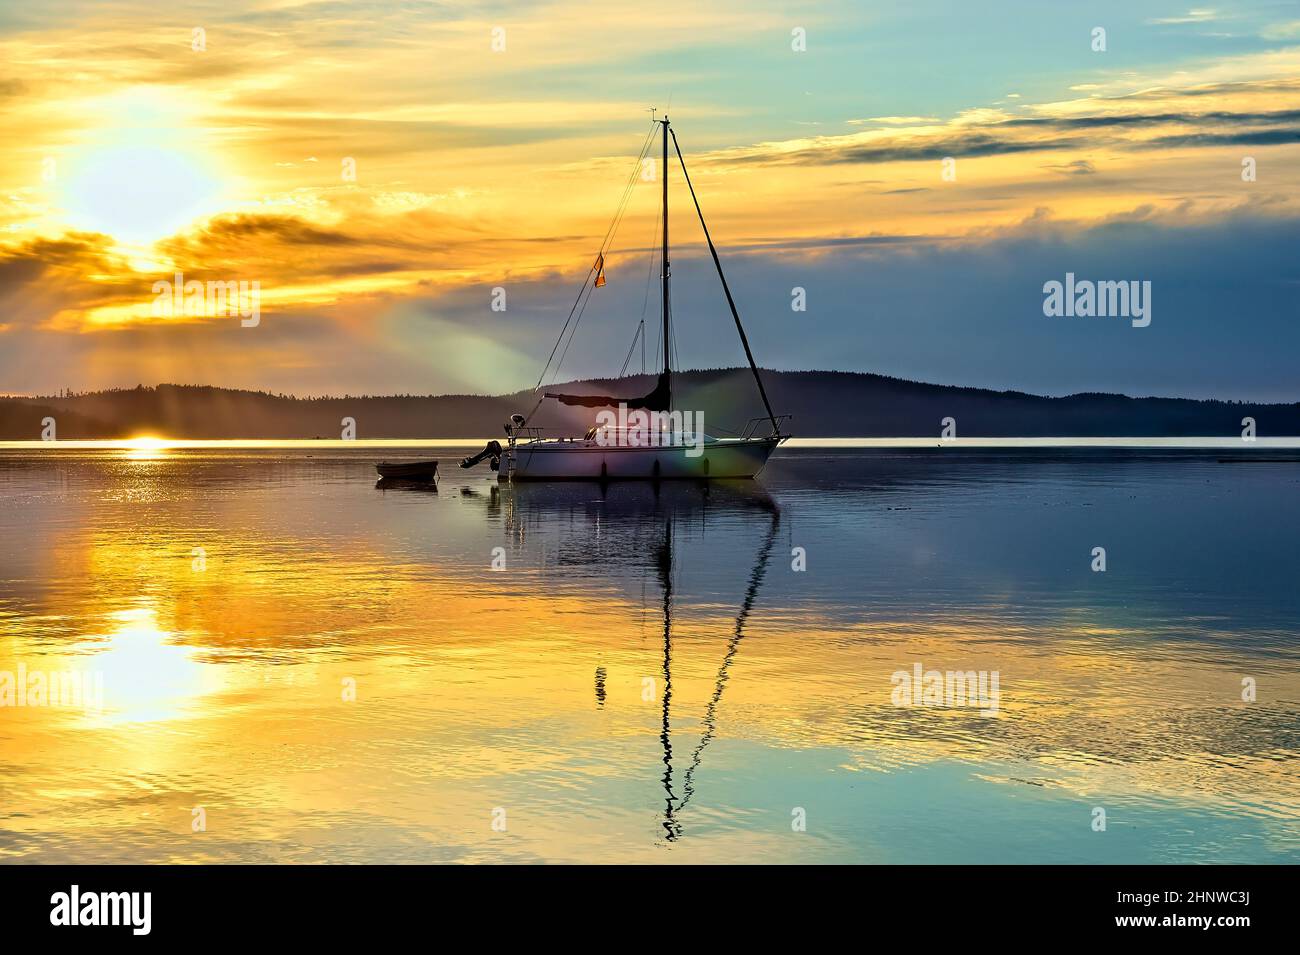 A sailboat moored in the early morning sunrise on the coast of Vancouver Island British Columbia Canada Stock Photo